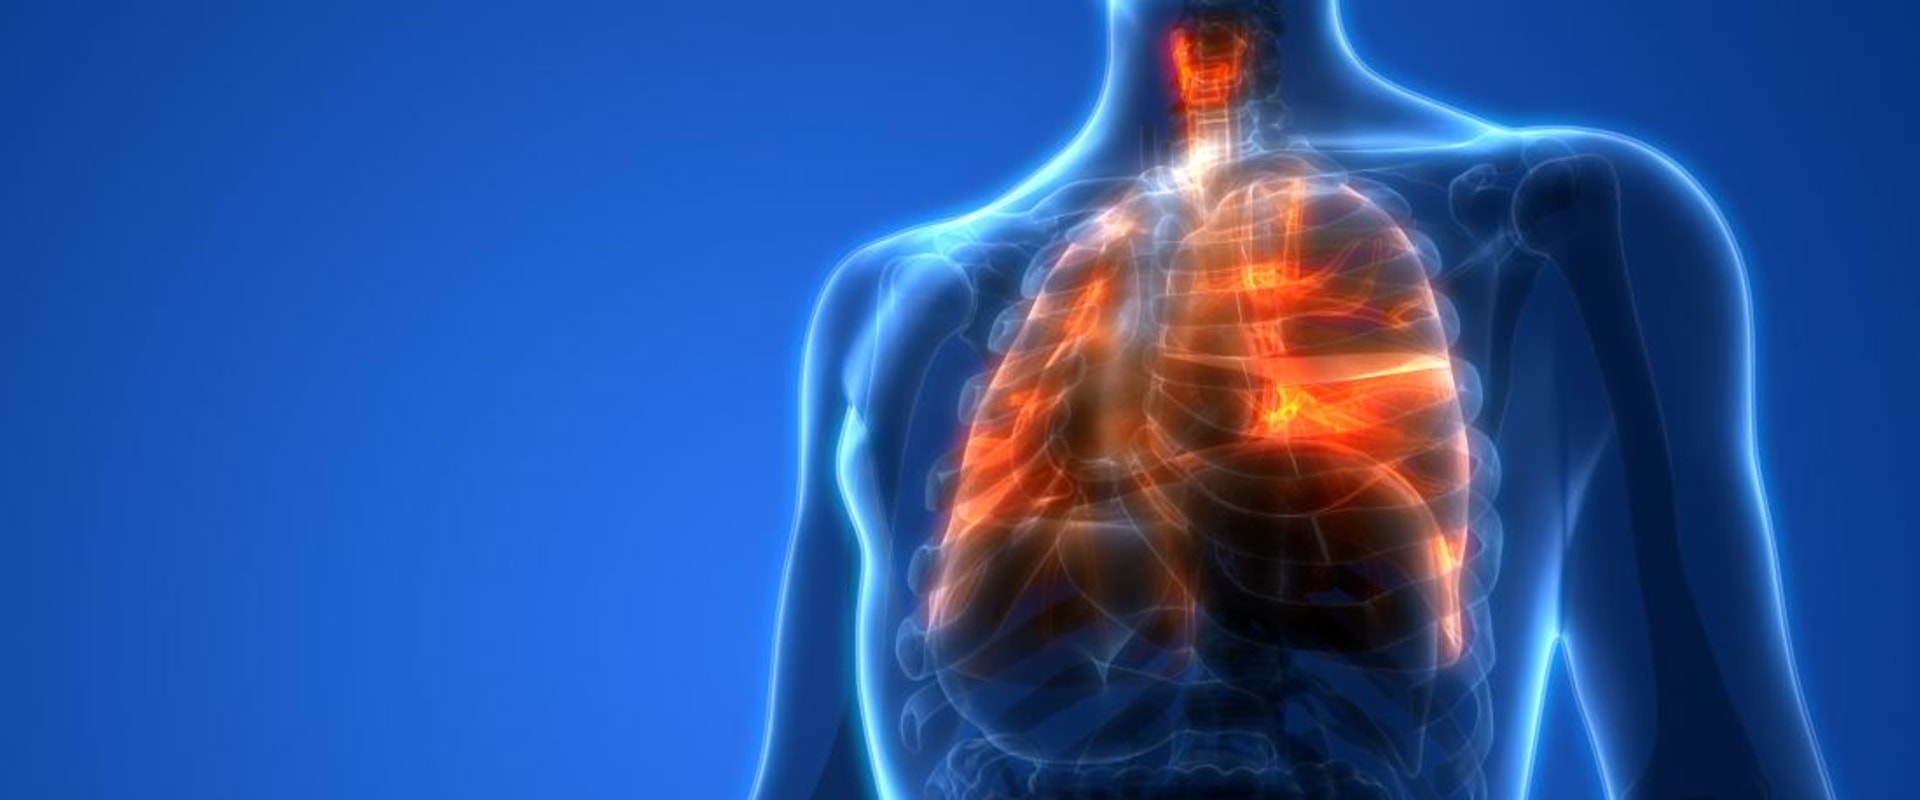 What is lung health?